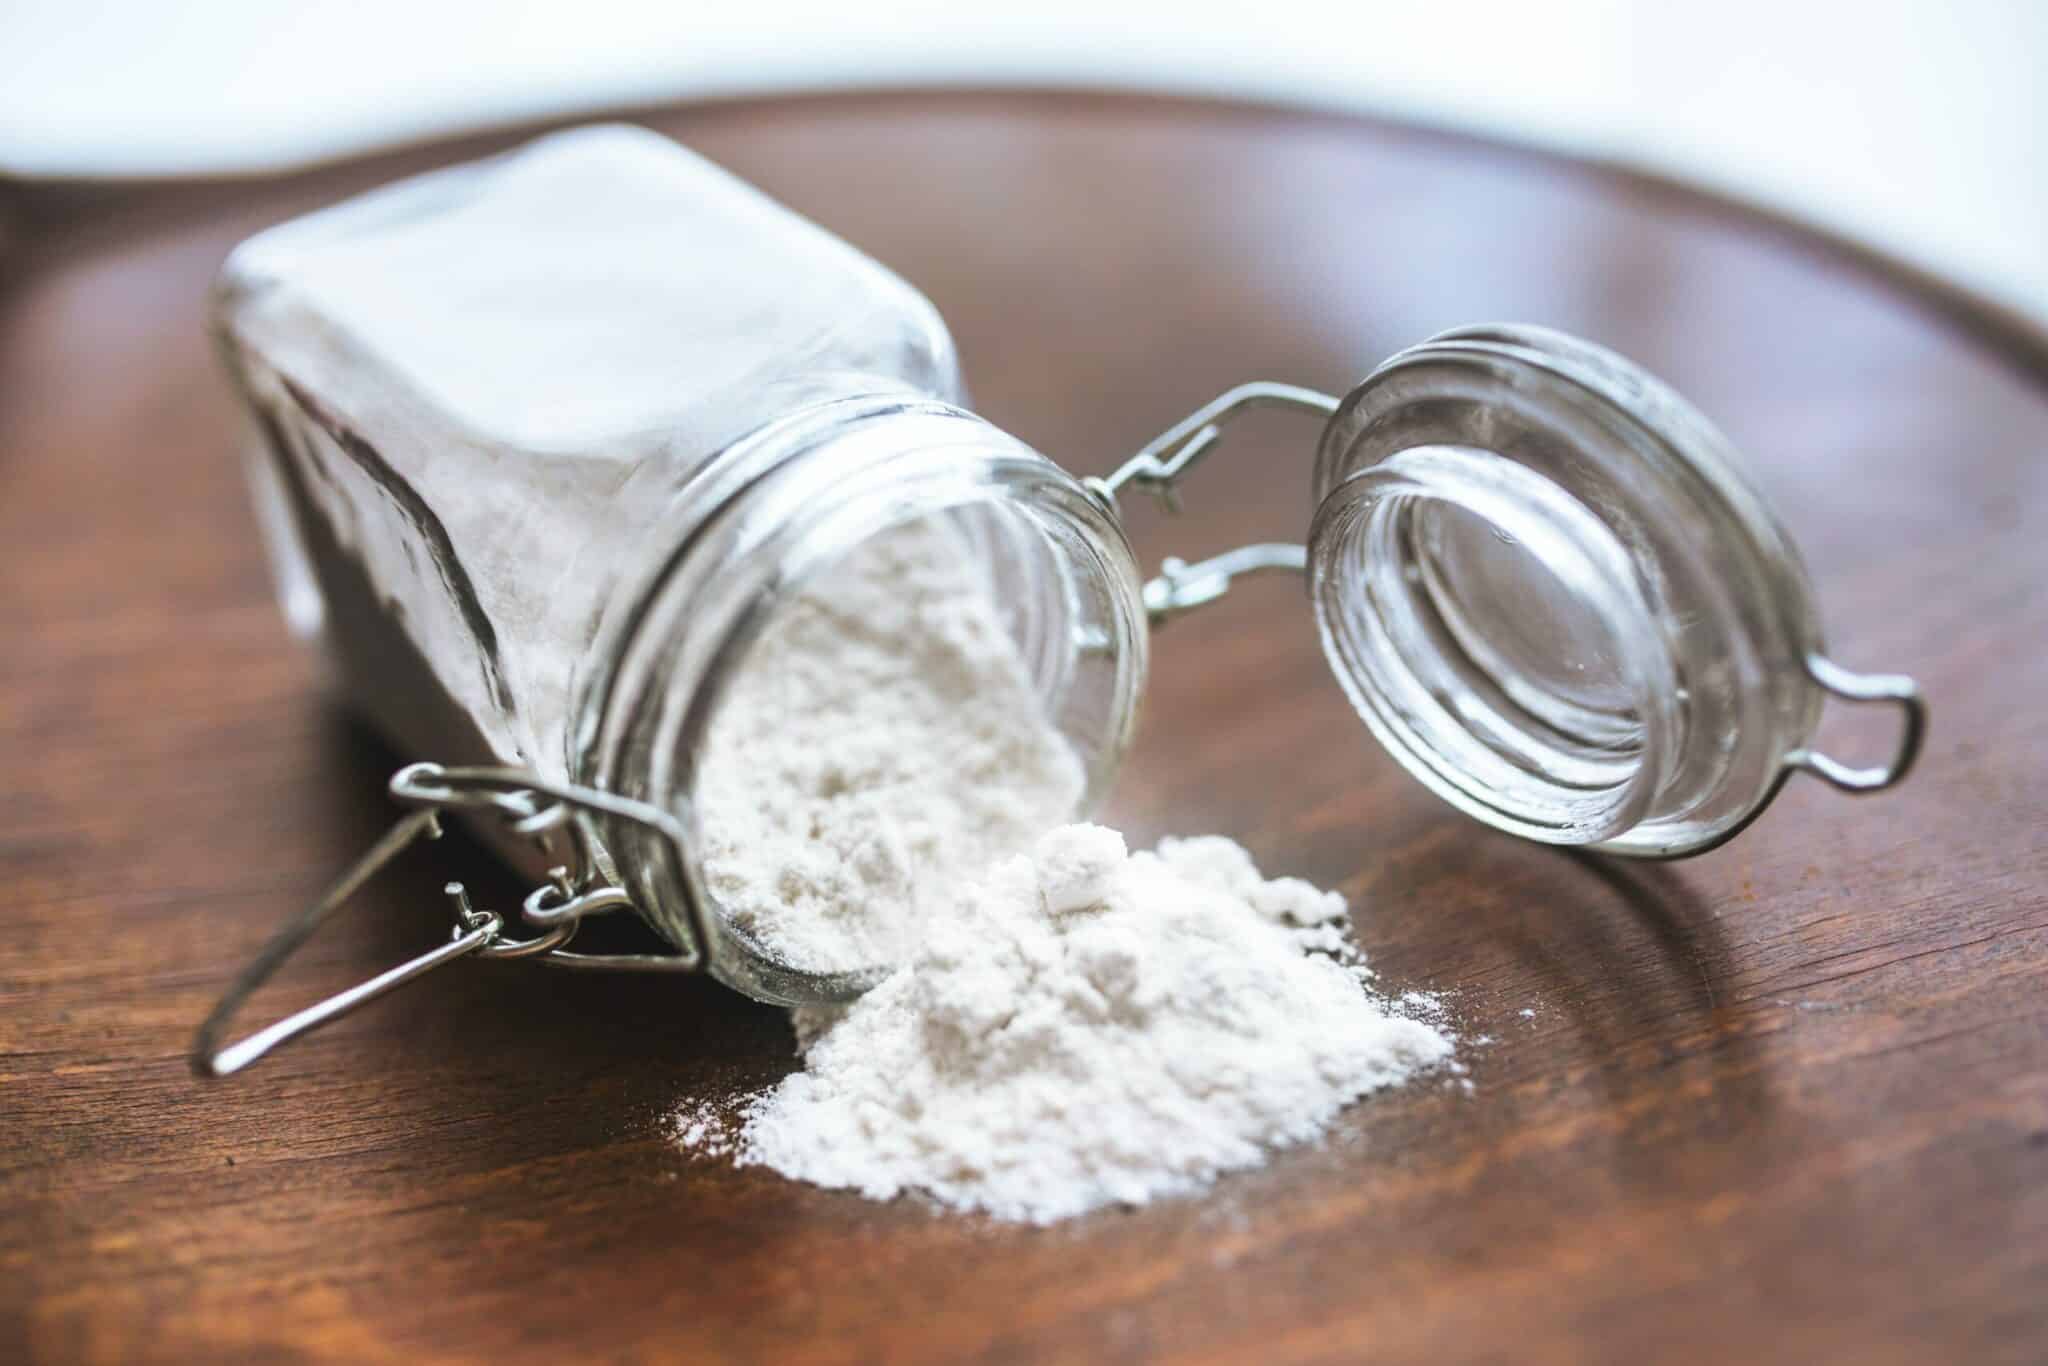 How to Use a Baking Soda Egg Substitute